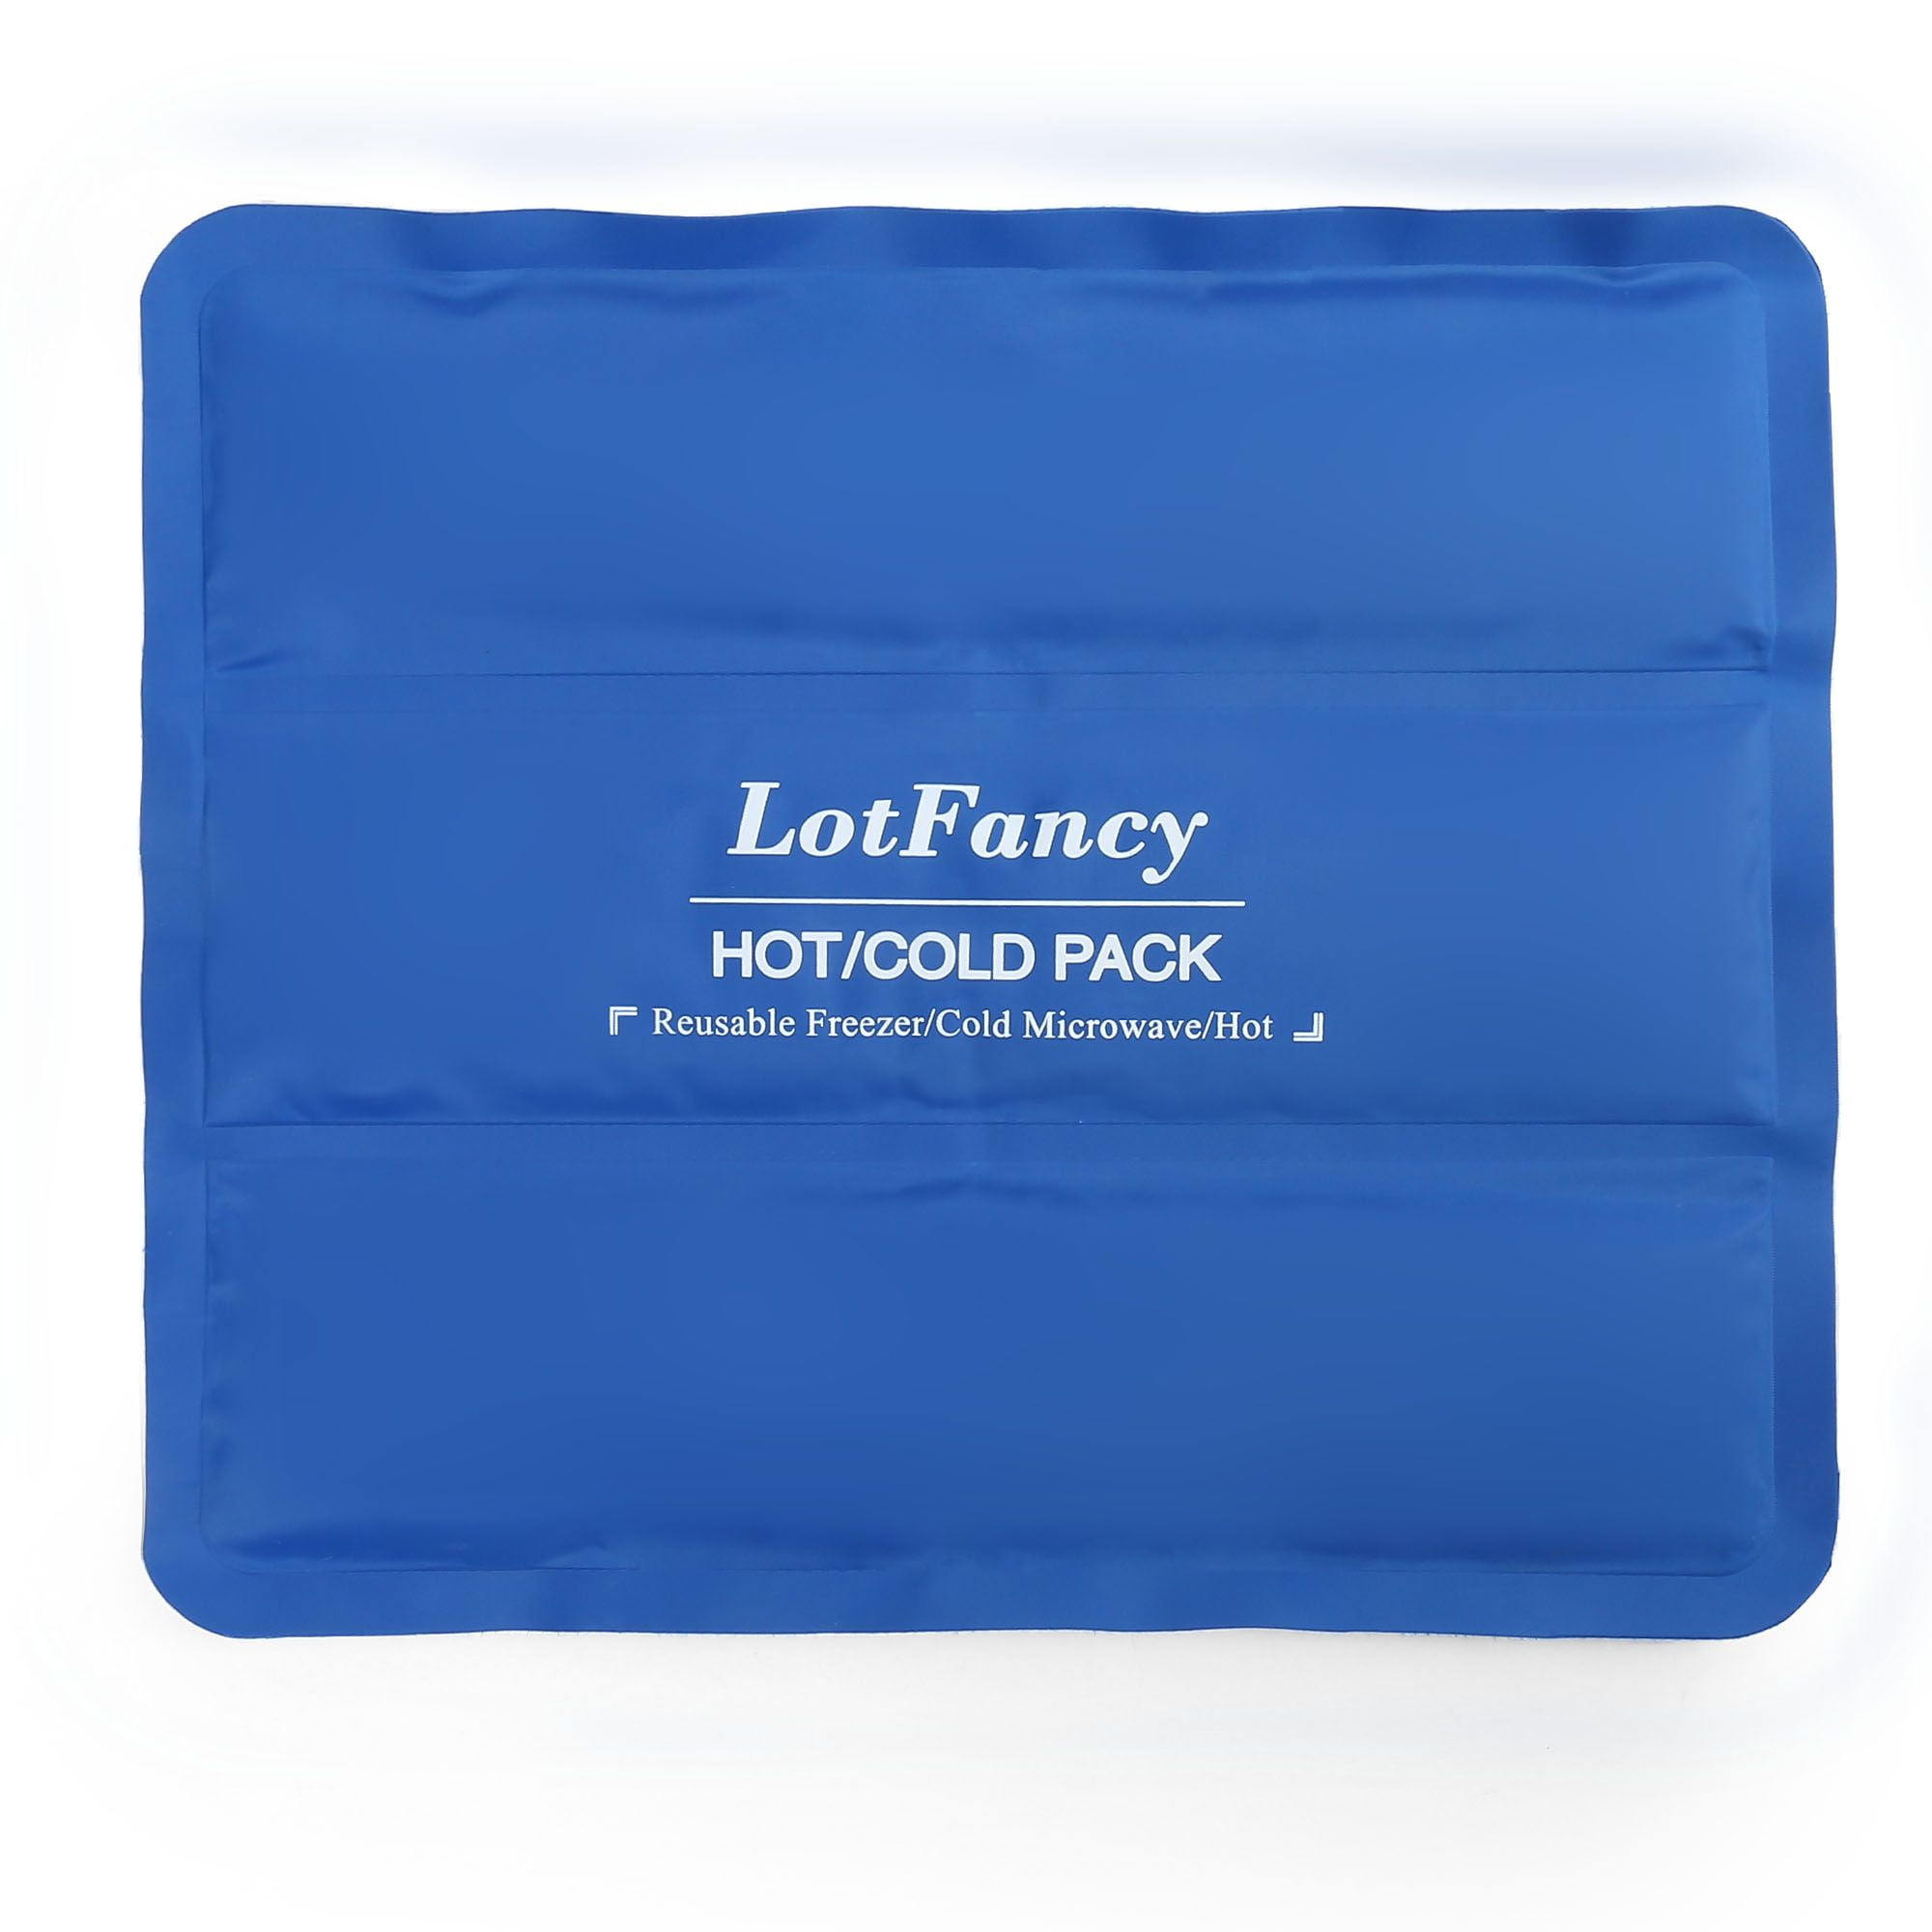 LotFancy Breast Ice Packs, 2 Hot Cold Breast Therapy Packs and 2